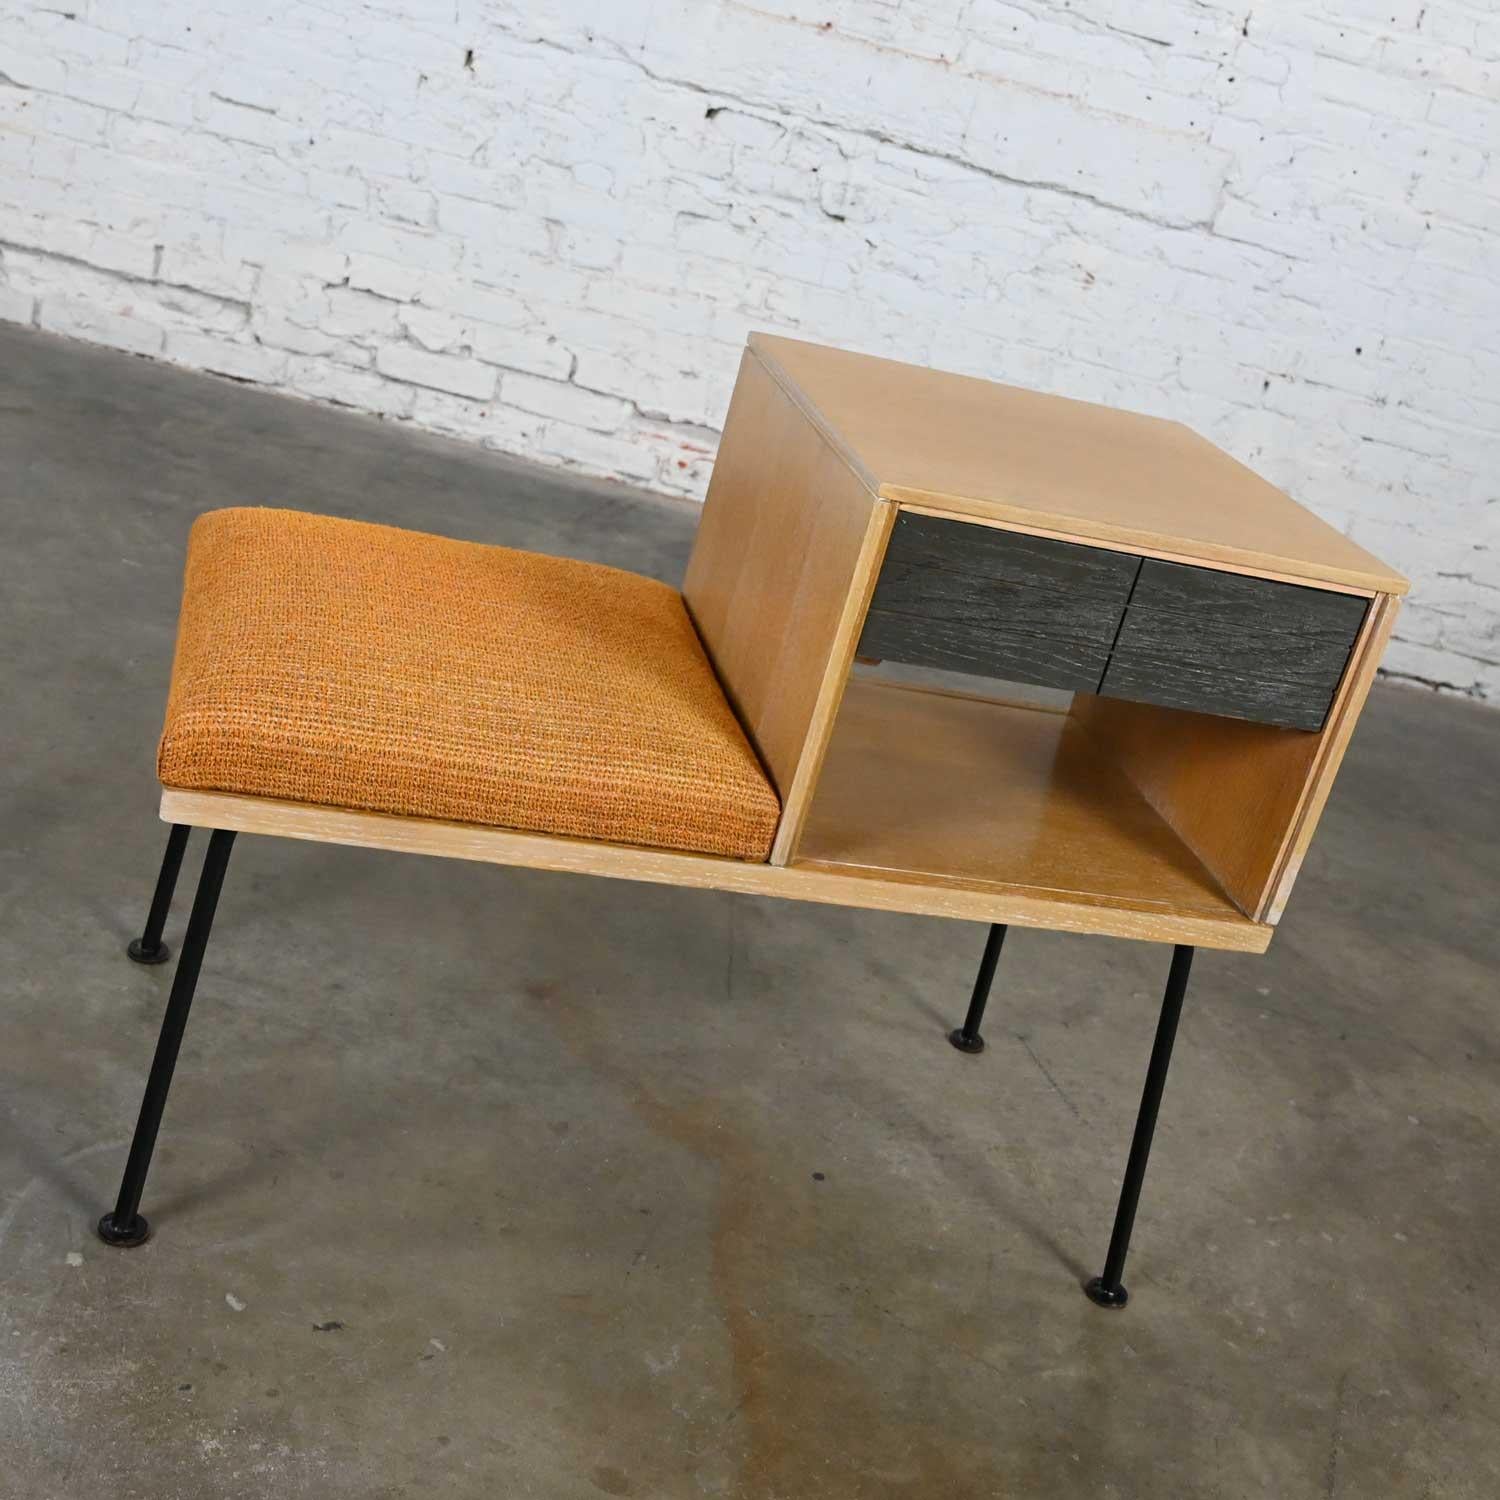 Wonderful vintage Mid-Century Modern Mengel telephone bench by Raymond Loewy. Comprised of a limed oak case, cerused oak drawer fronts, black iron legs and the original gold upholstery. Beautiful condition, keeping in mind that this is vintage and